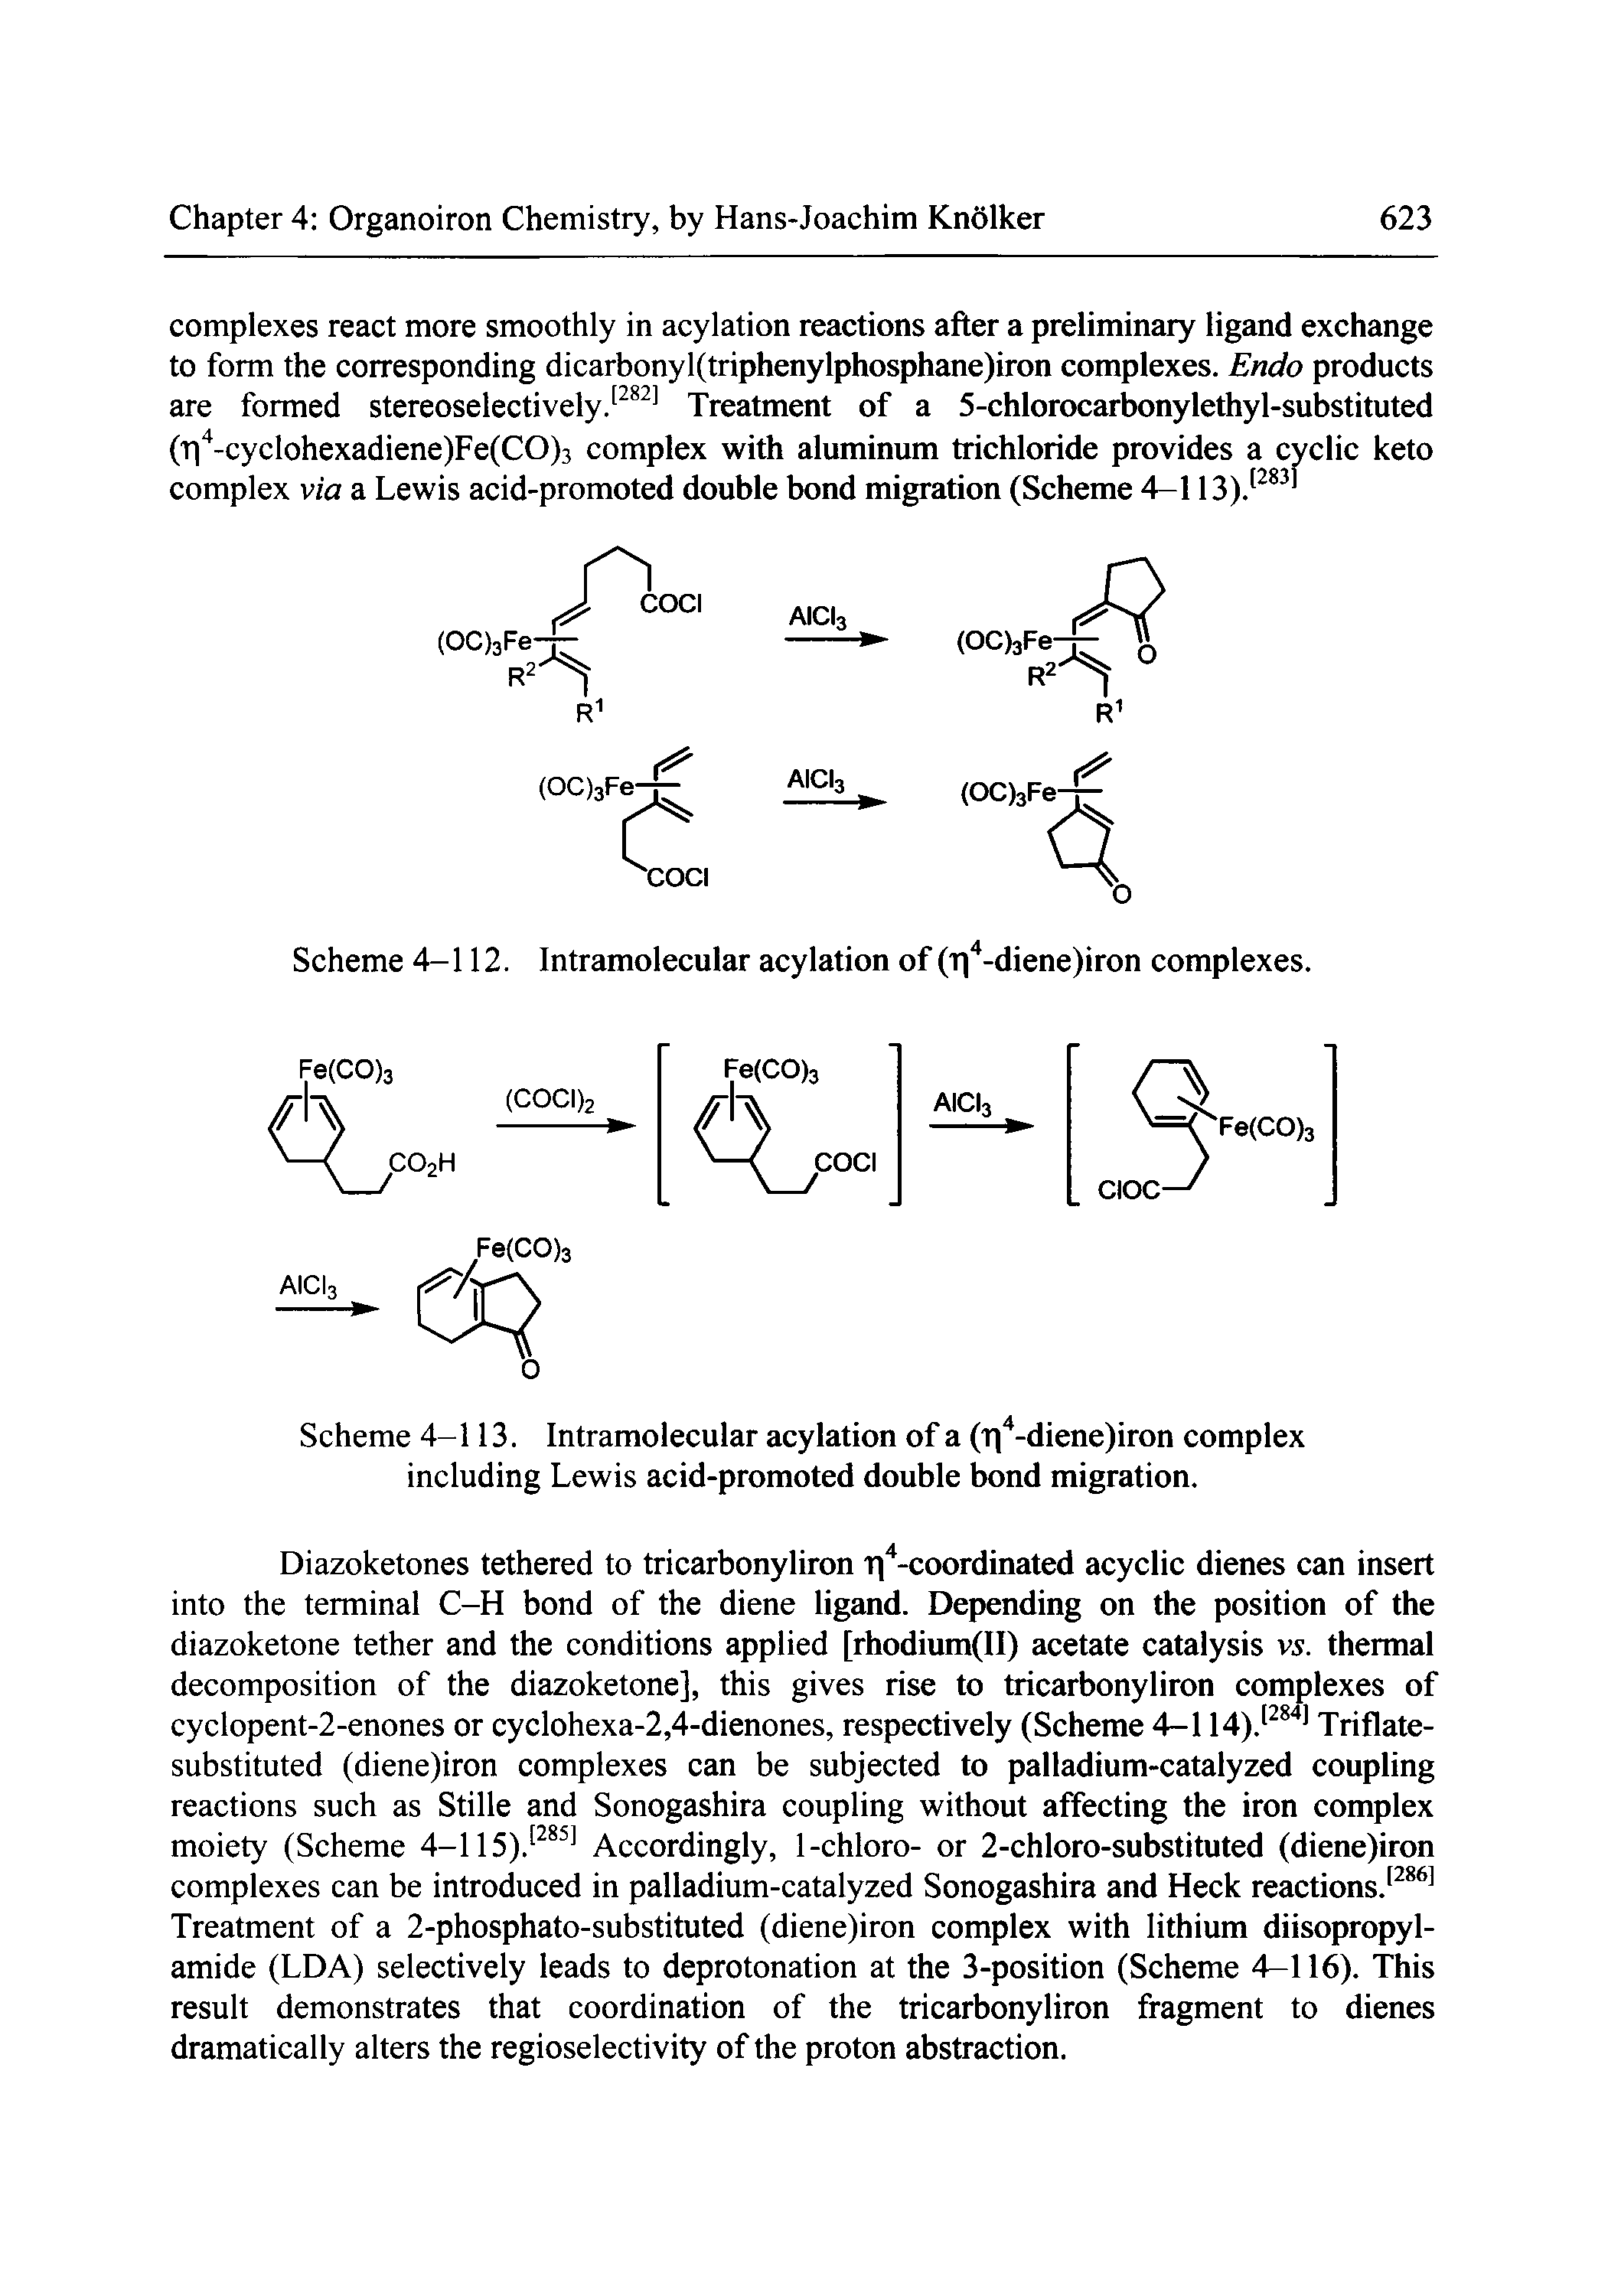 Scheme 4-113. Intramolecular acylation of a (T -diene)iron complex including Lewis acid-promoted double bond migration.